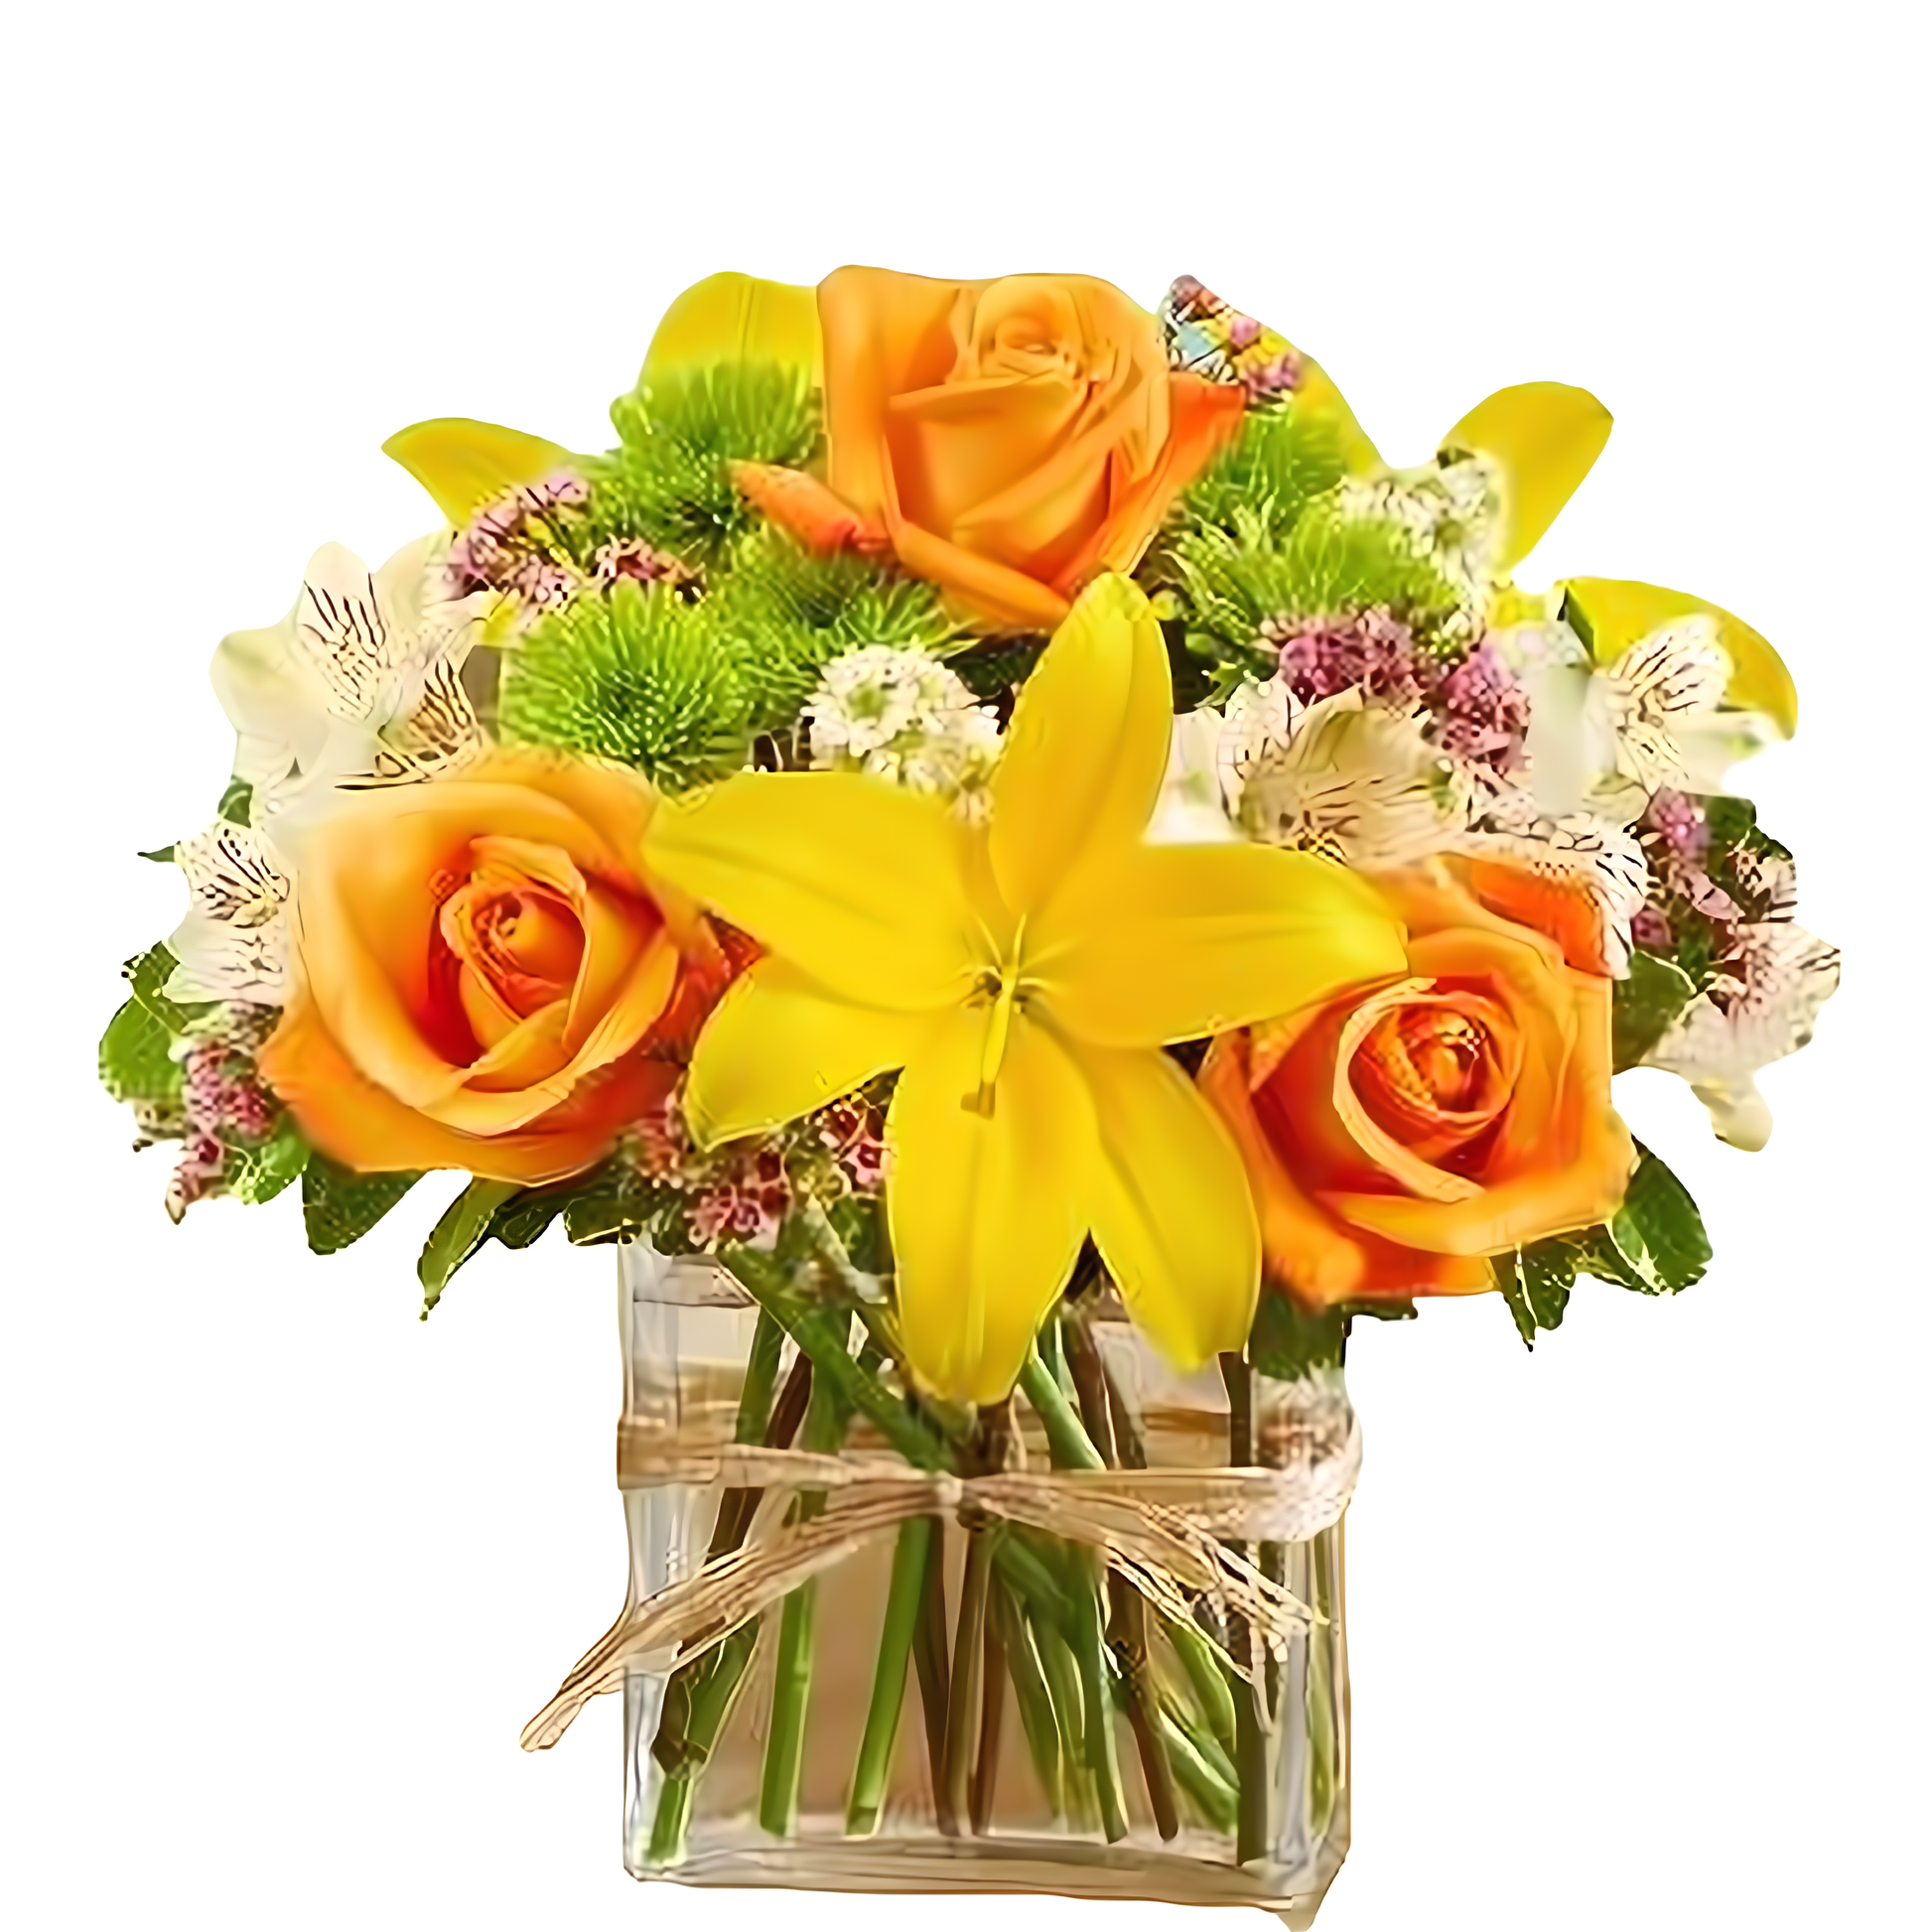 NYC Flower Delivery - Fields of the World in Rectangle - Products > Corporate Gifts